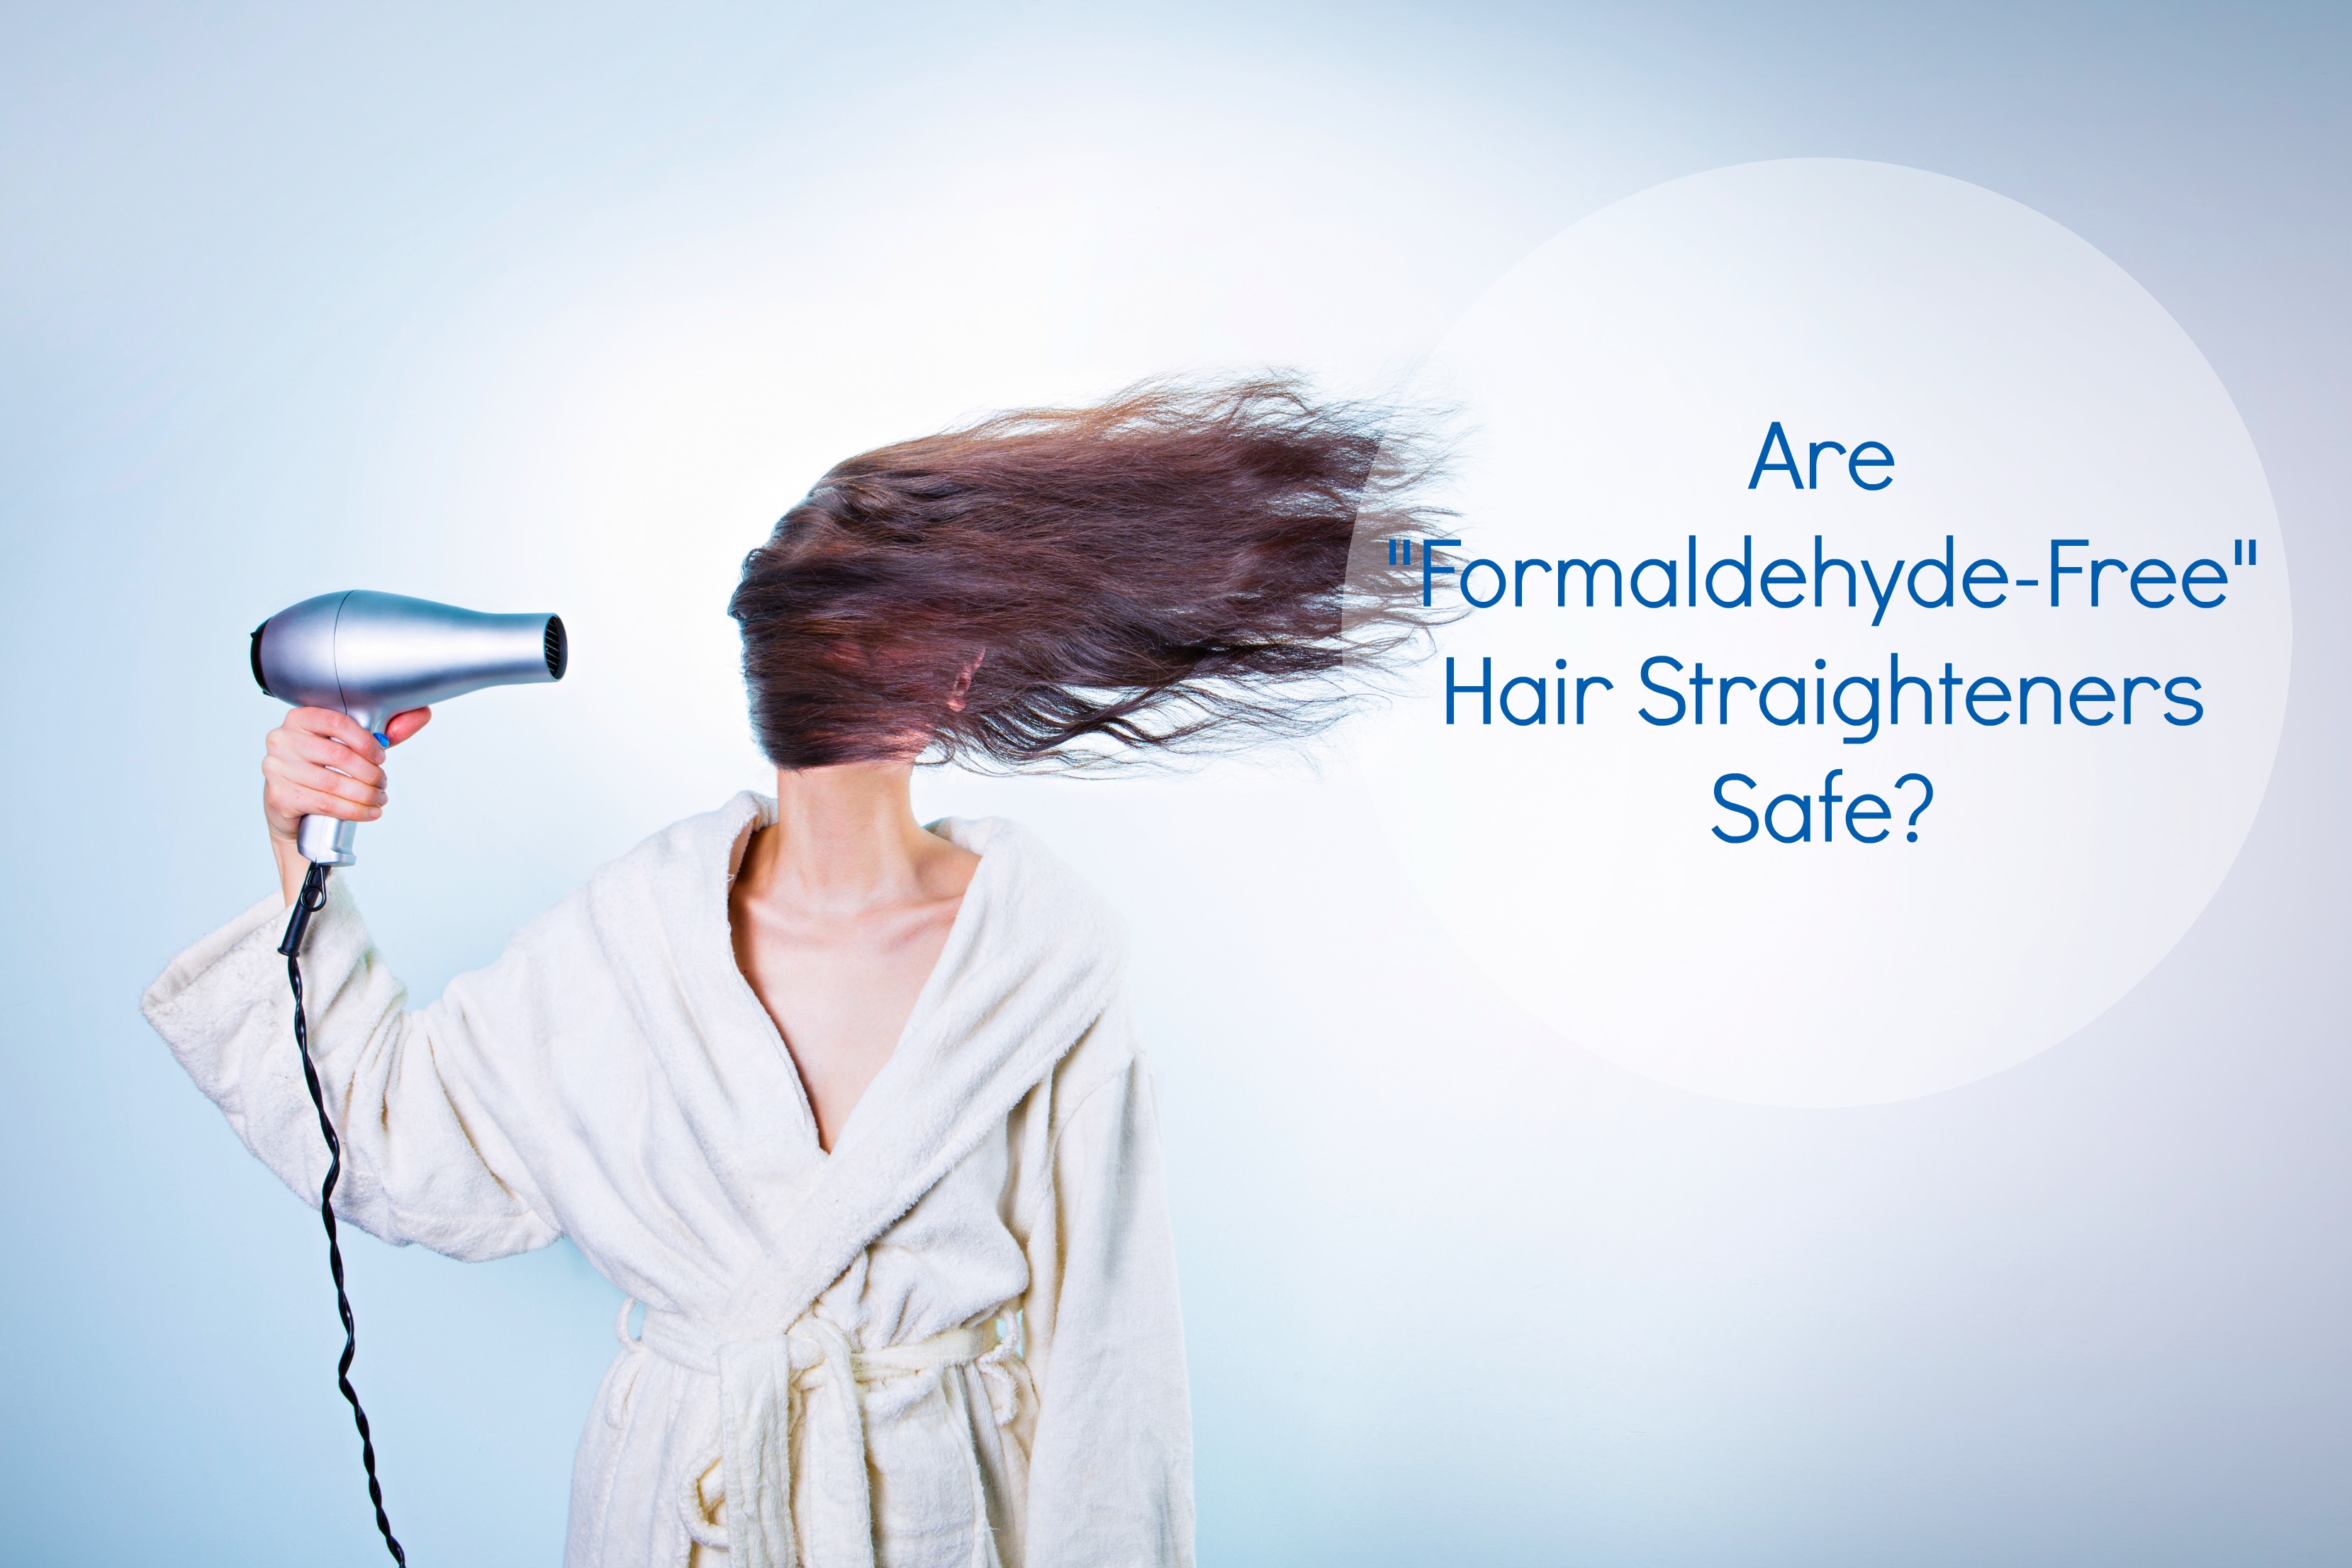 Are “Formaldehyde-Free” Hair Straighteners Safe?